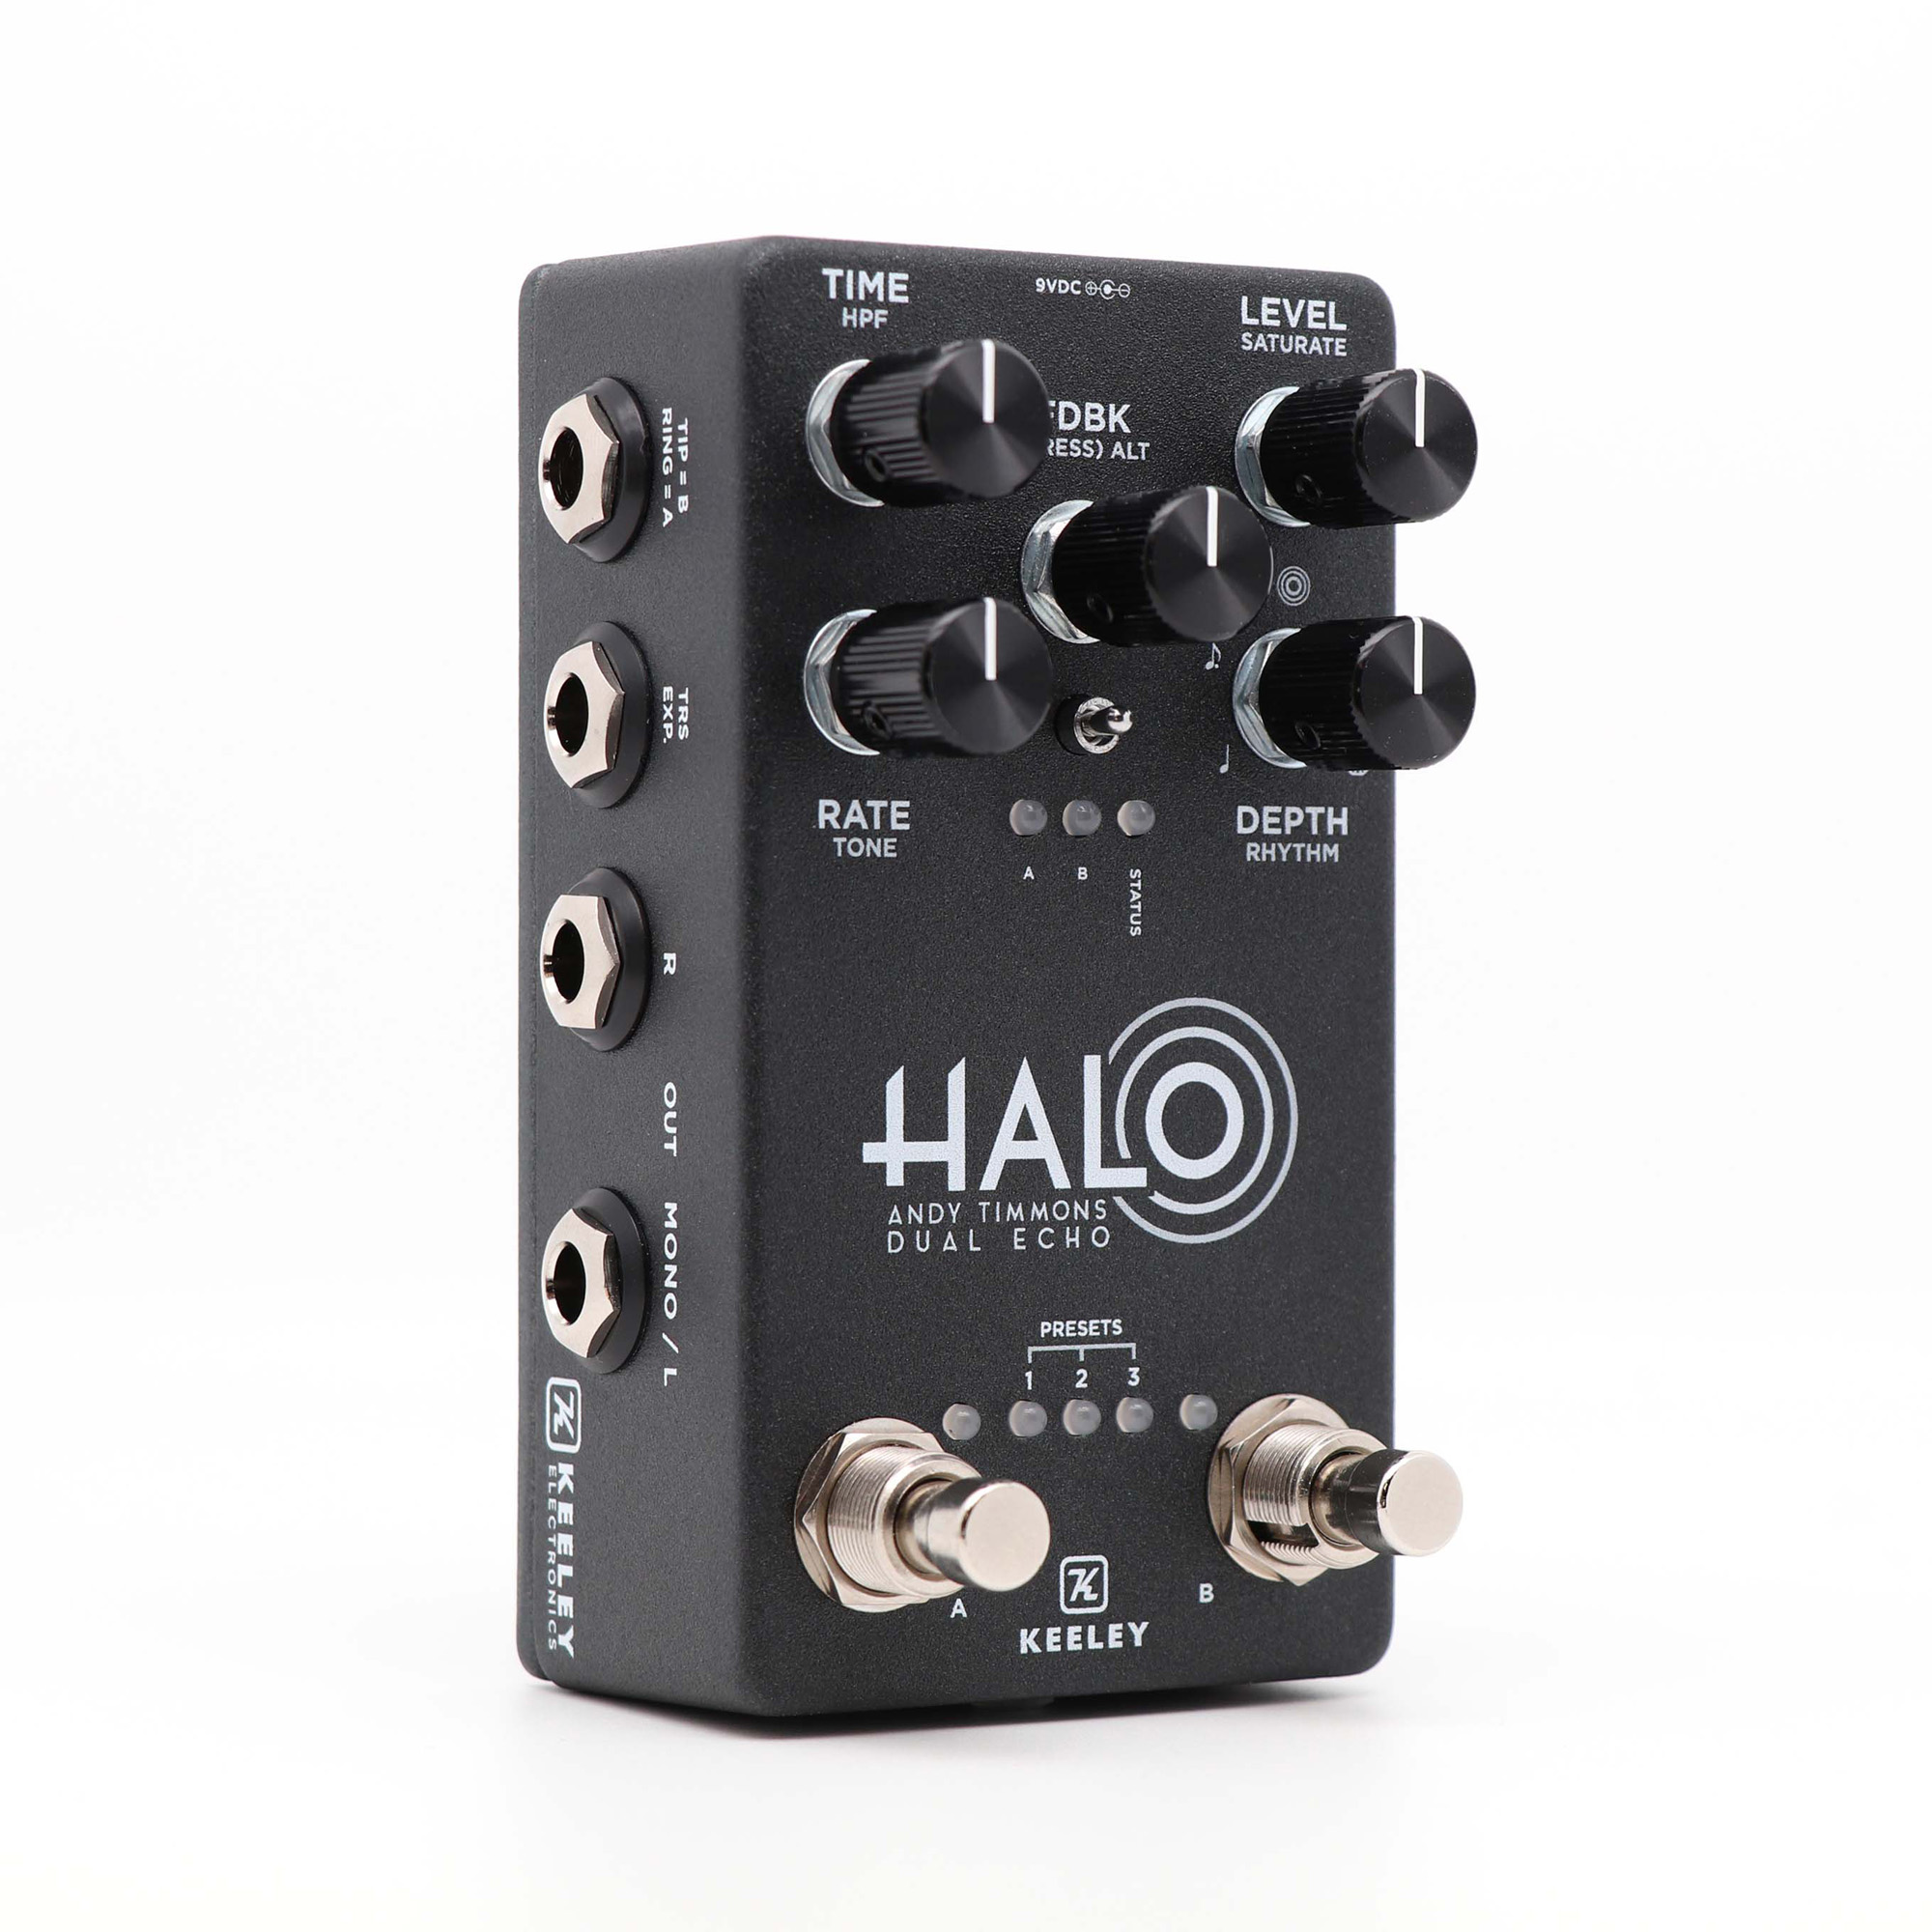 Keeley  Electronics Halo Dual Echo Andy Timmons Signature - Reverb, delay & echo effect pedal - Variation 1